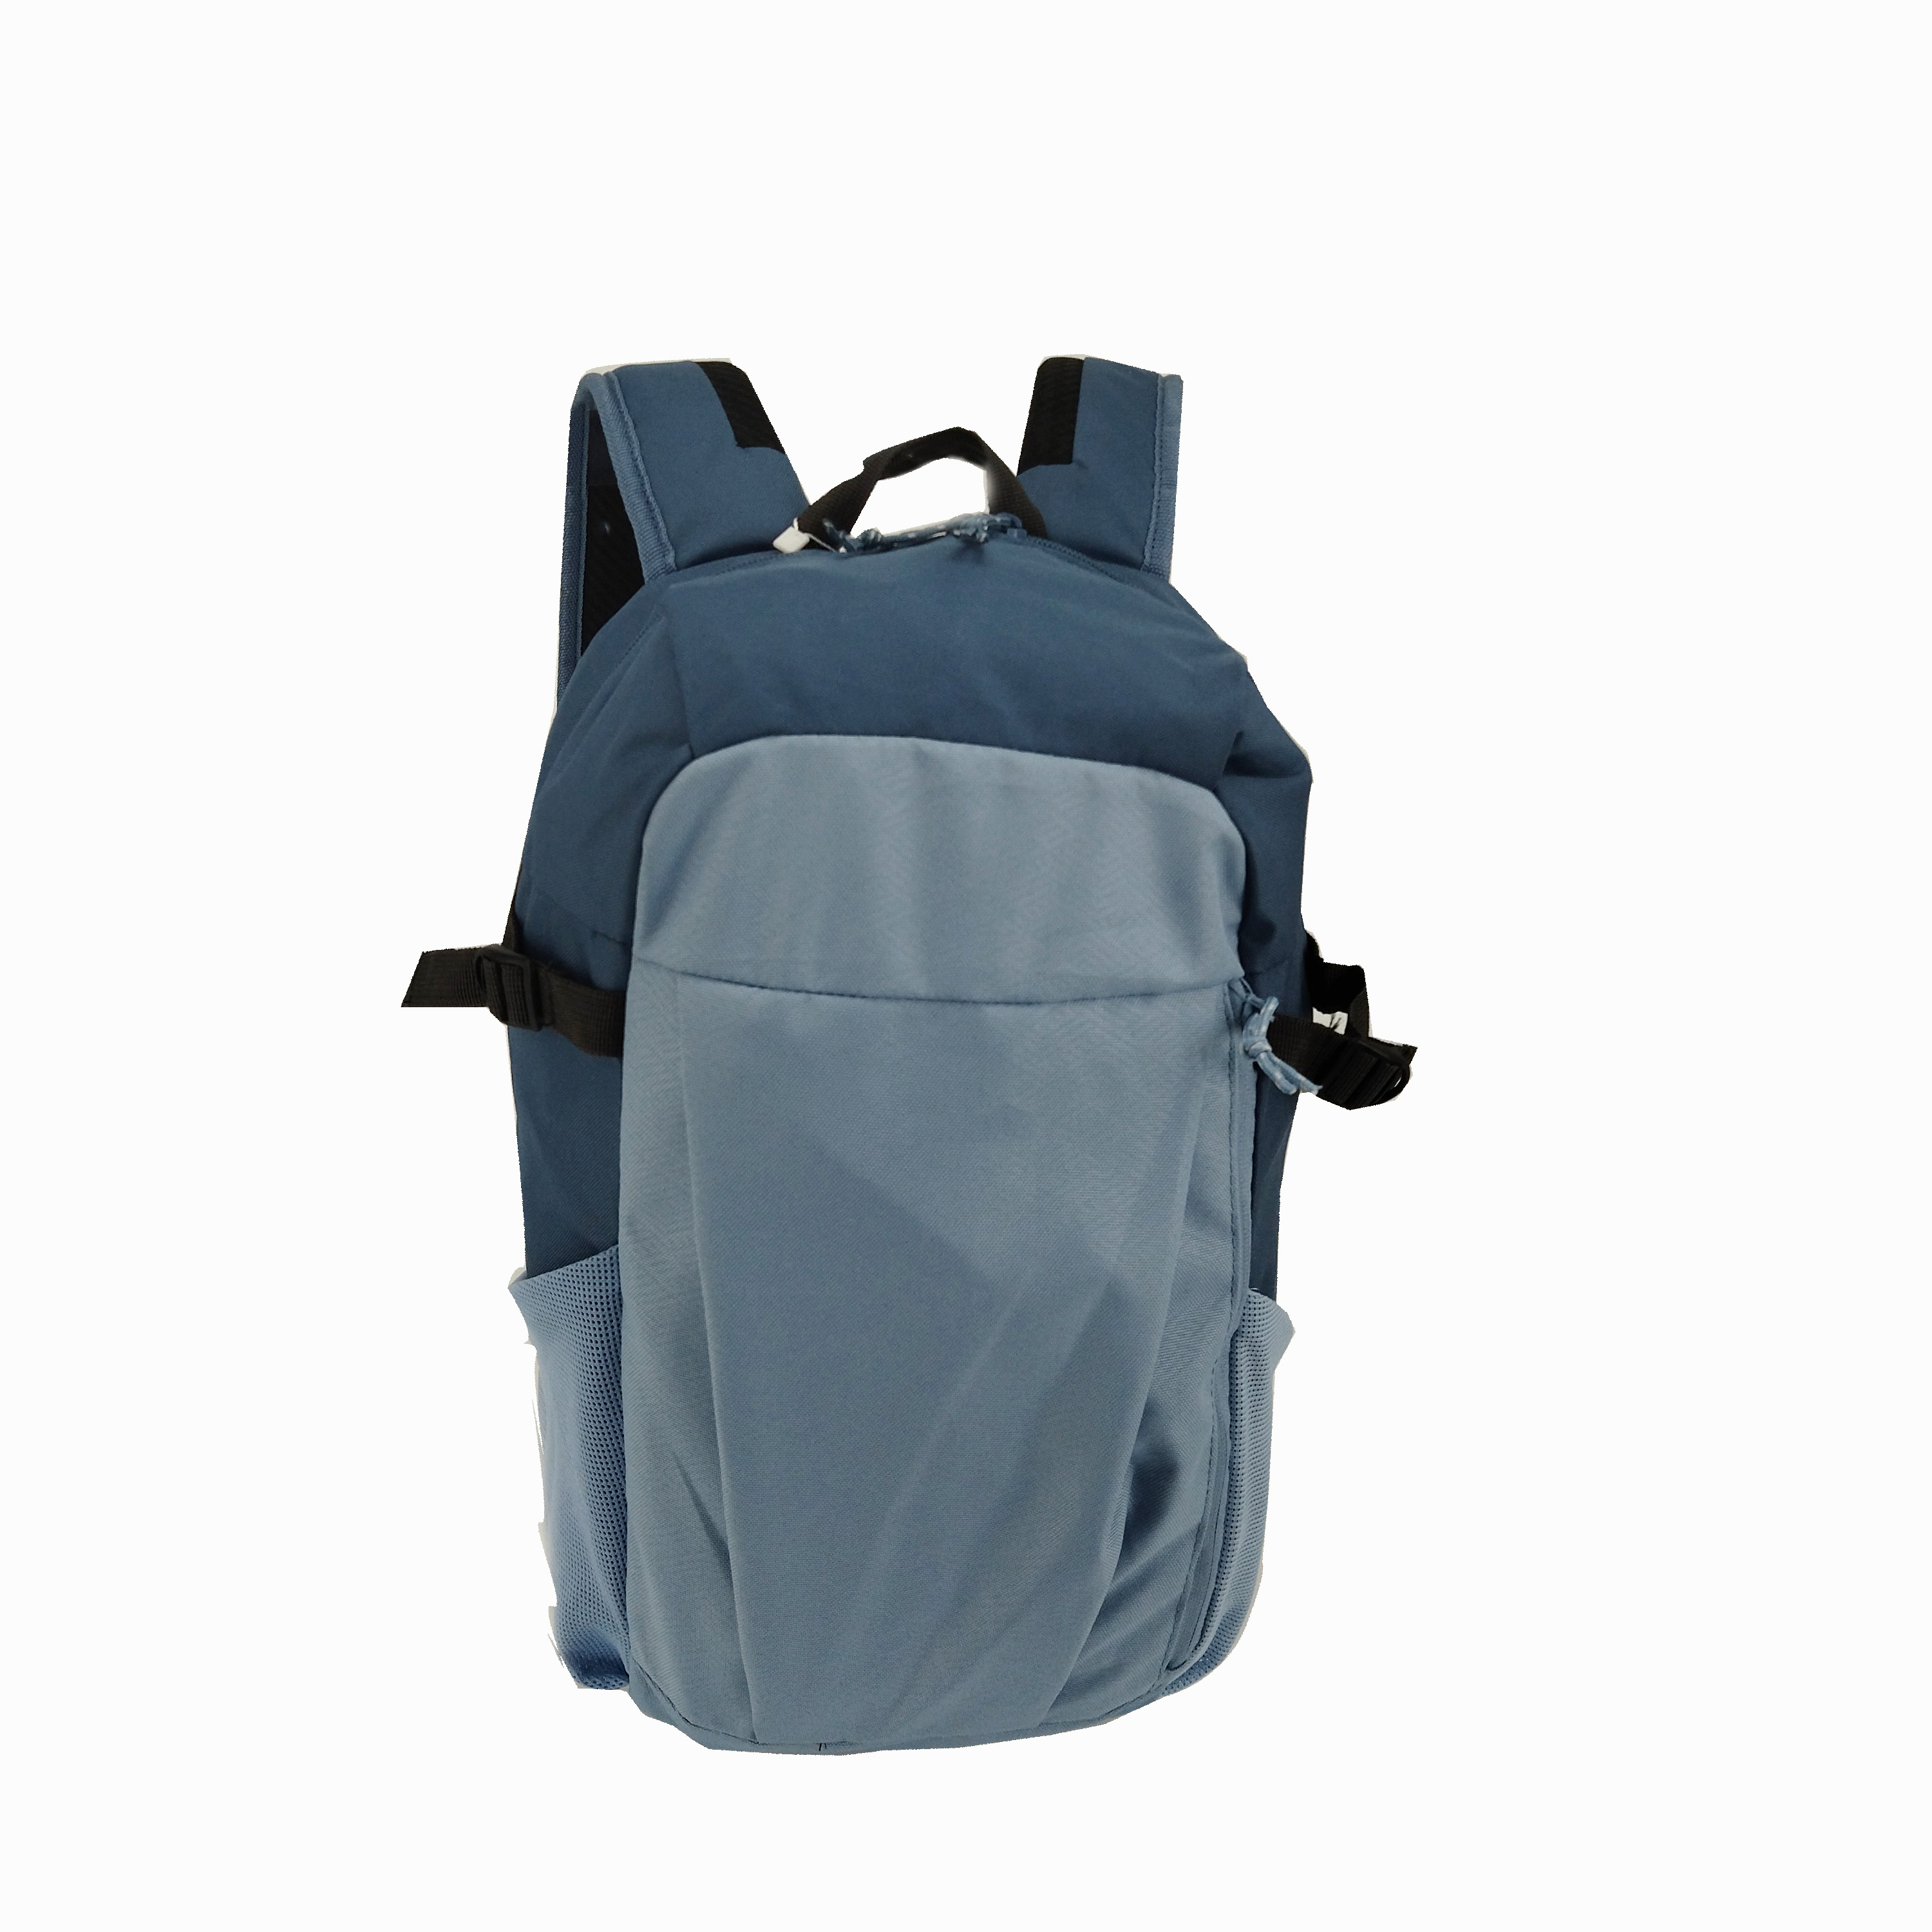 leisure bag/ligh weight backpack/promotional backpack/kids backpack/kids ourdoor backpack/